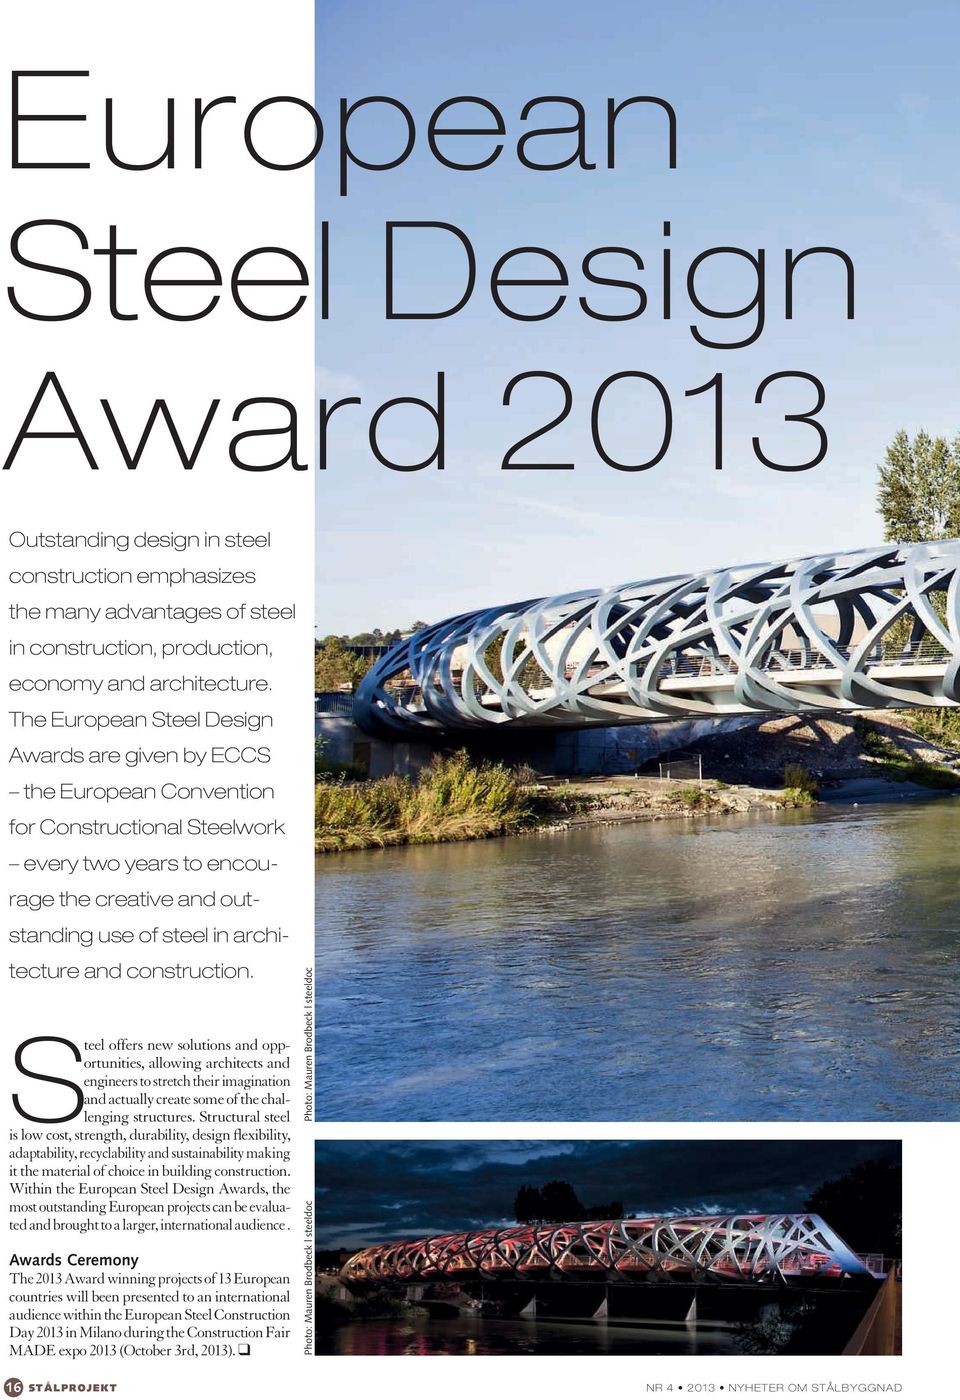 construction. Steel offers new solutions and opportunities, allowing architects and engineers to stretch their imagination and actually create some of the challenging structures.